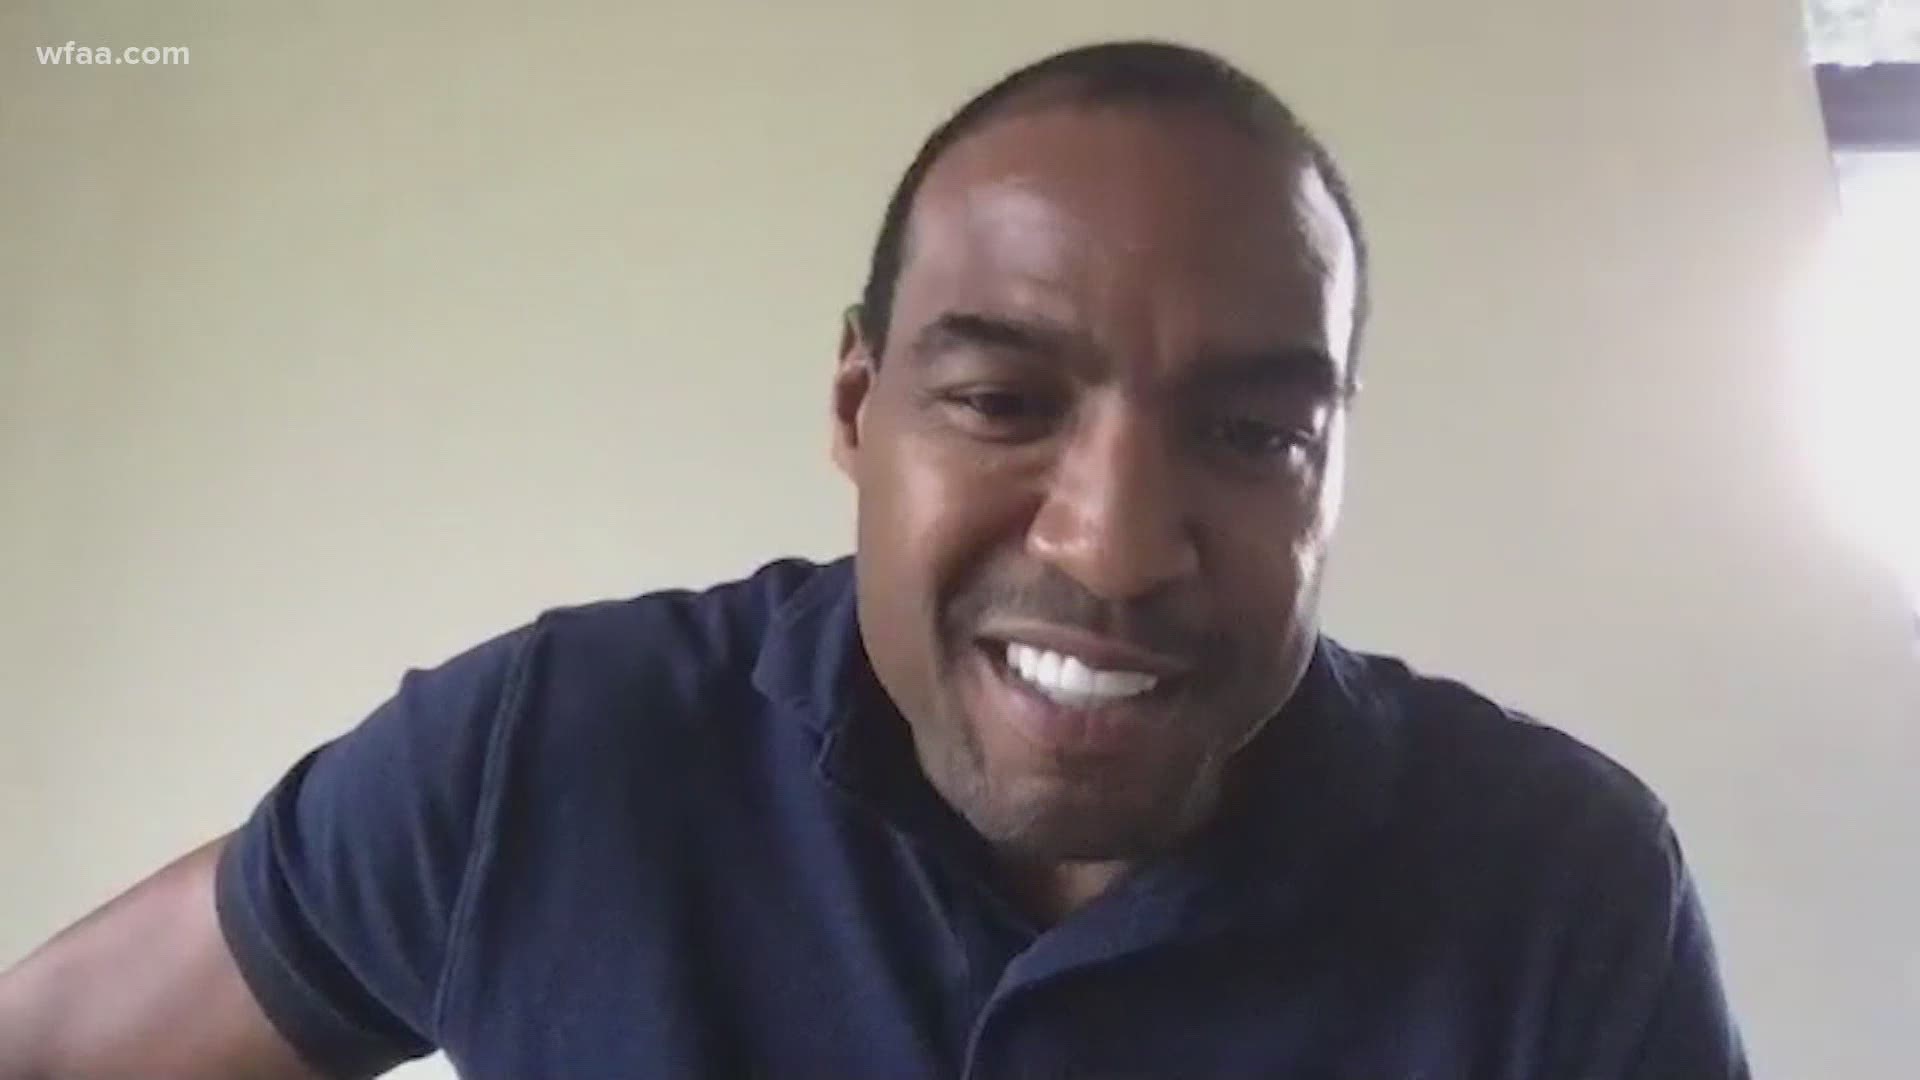 Darren Woodson says he and his family tested positive for COVID-19. He talks about how it felt and also about the upcoming NFL football season.